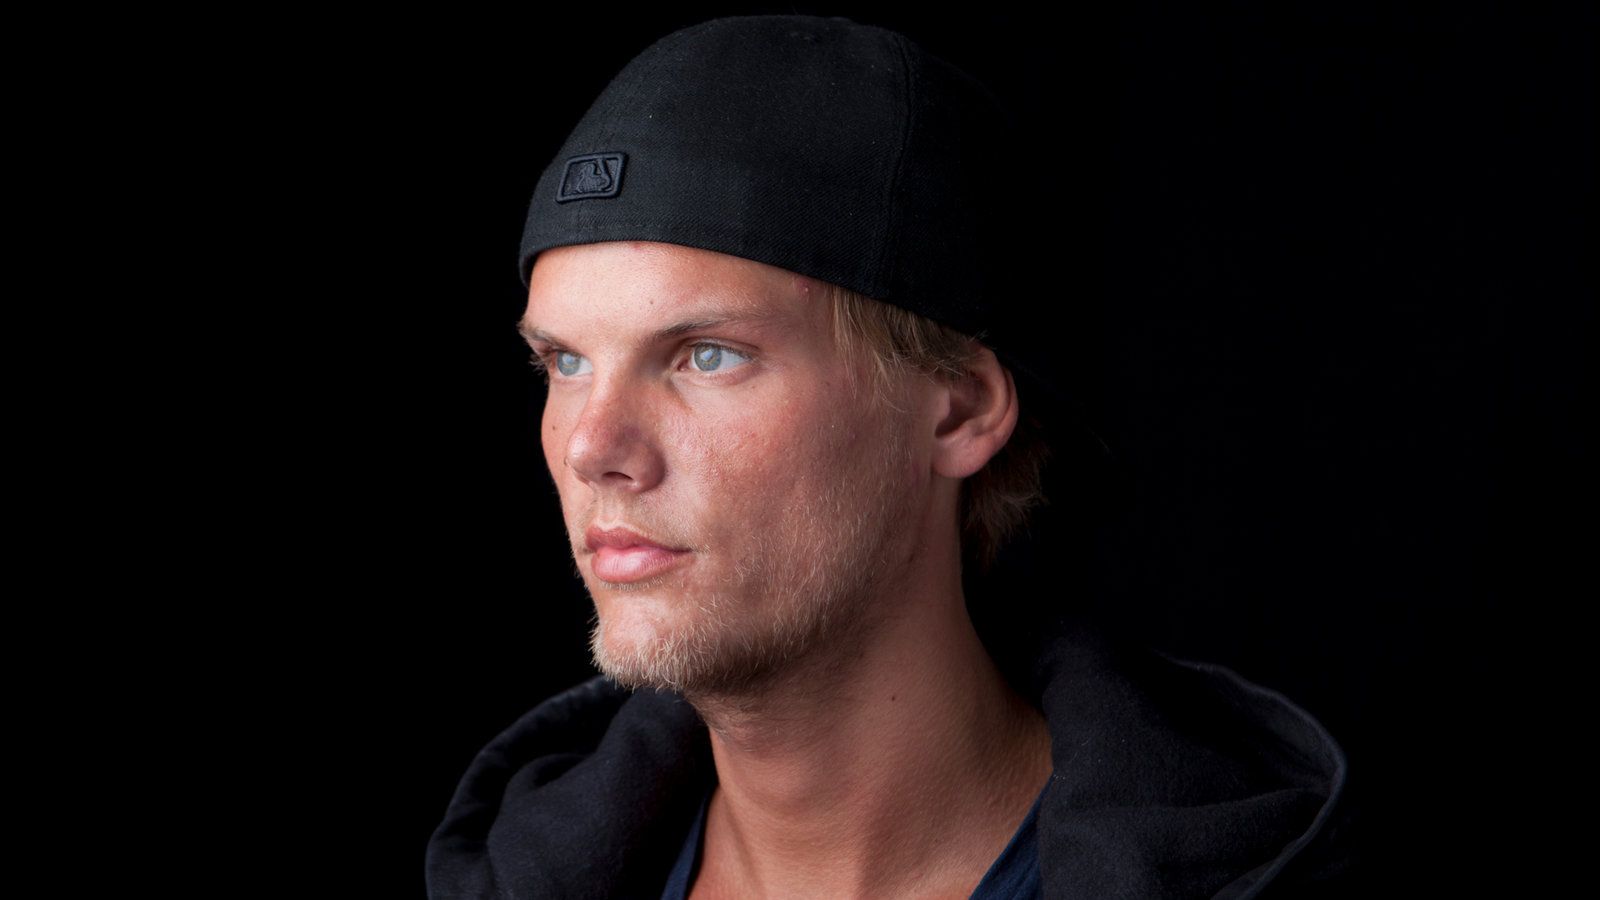 Avicii, Electronic Dance Music Producer and D.J., Is Dead